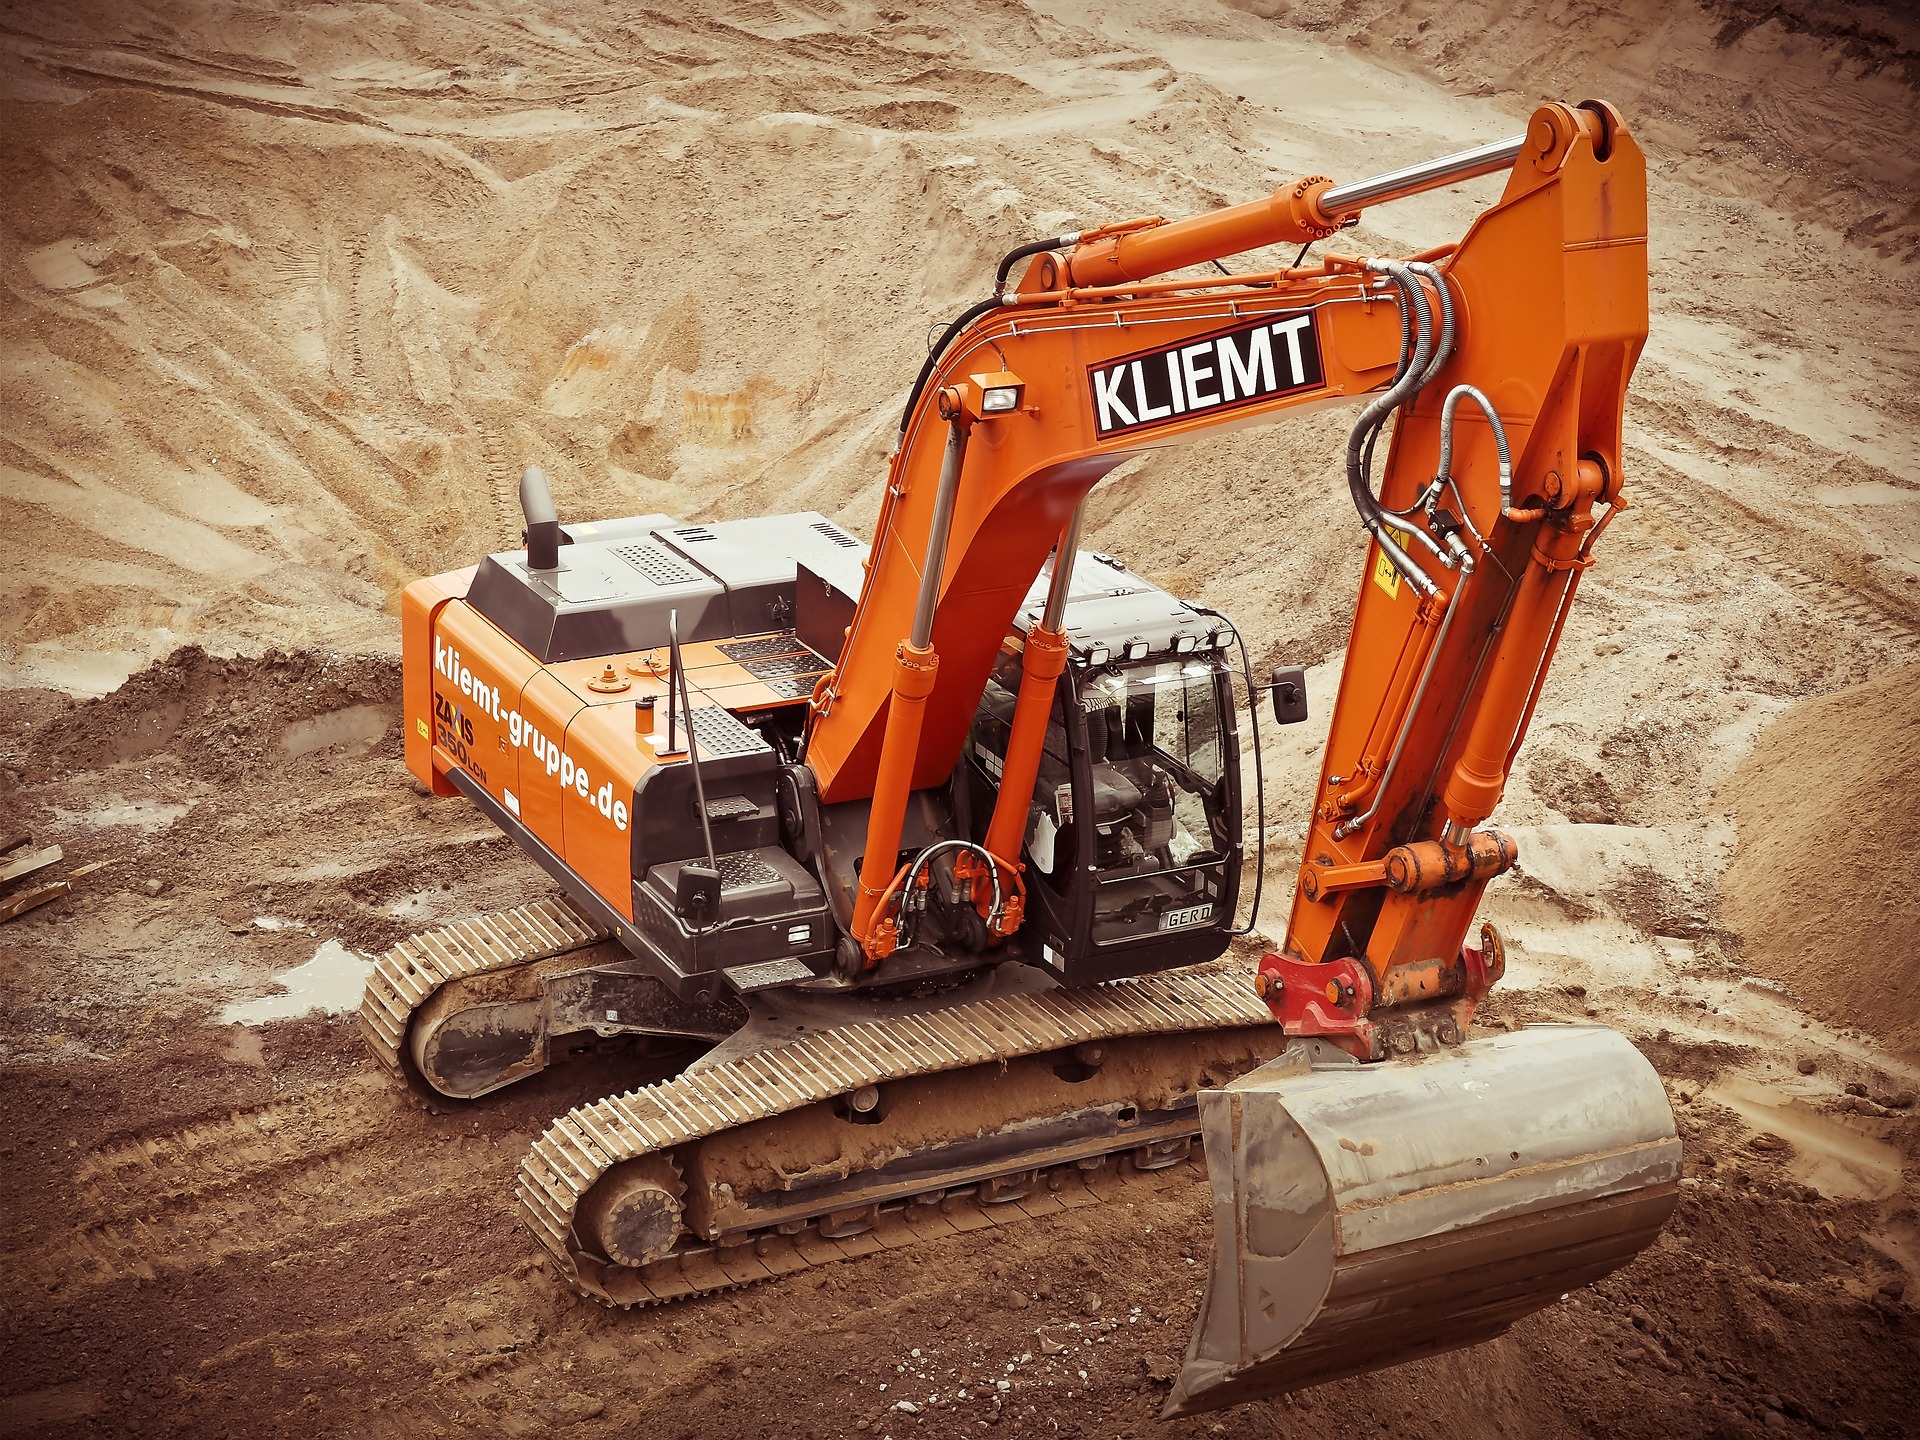 What to Look for When Buying an Excavator